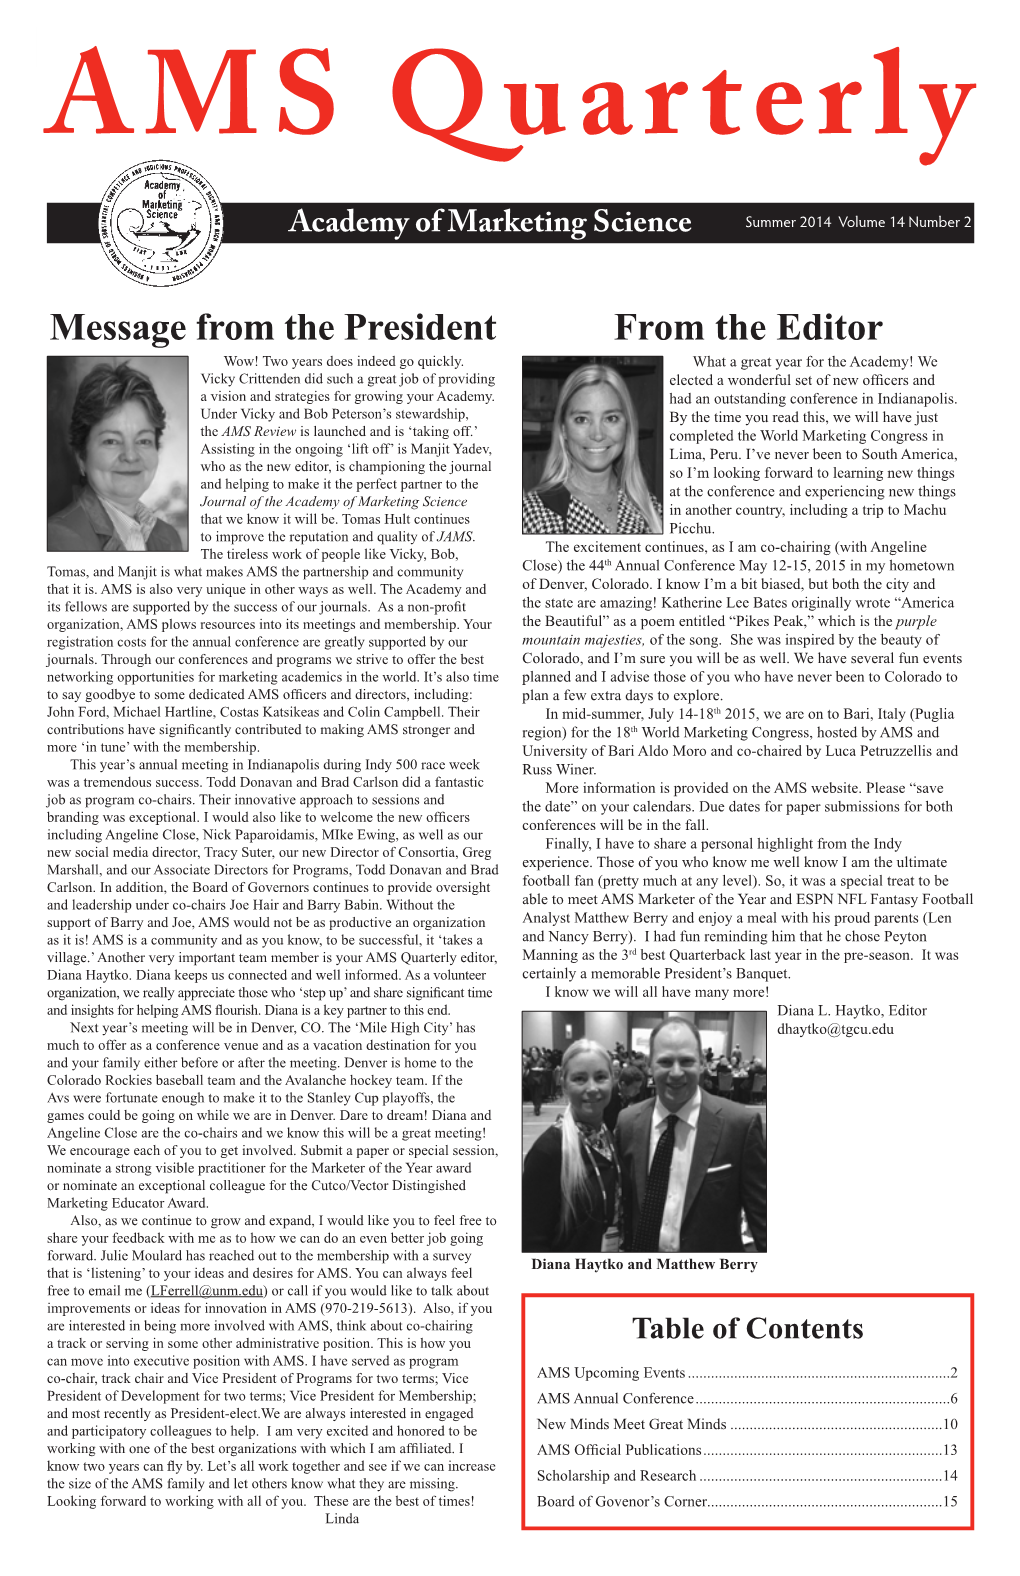 Message from the President from the Editor Wow! Two Years Does Indeed Go Quickly